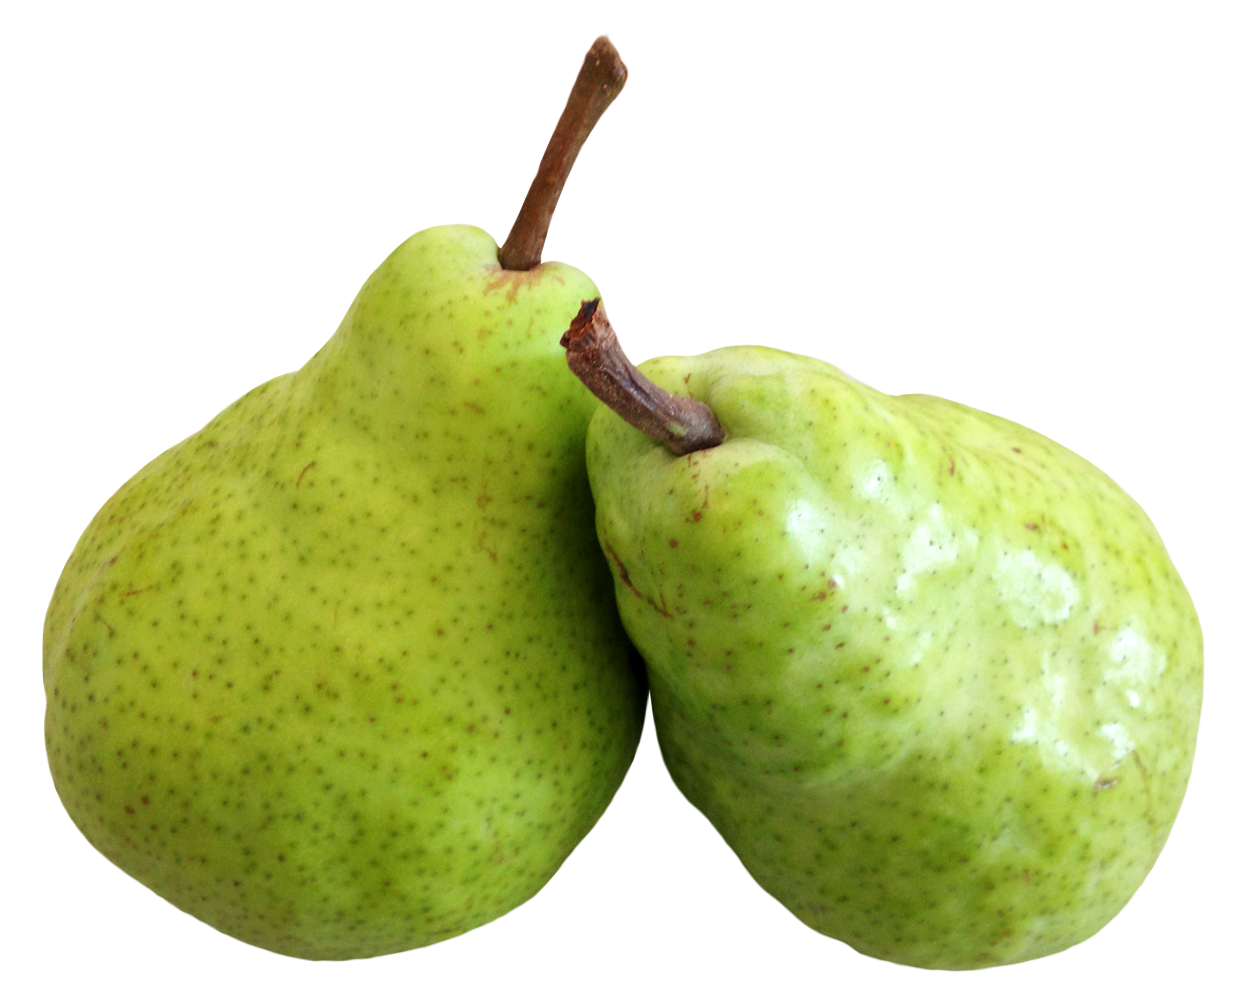 Pear Fruits Png Image Purepng Free Transparent Cc0 Png Image Library